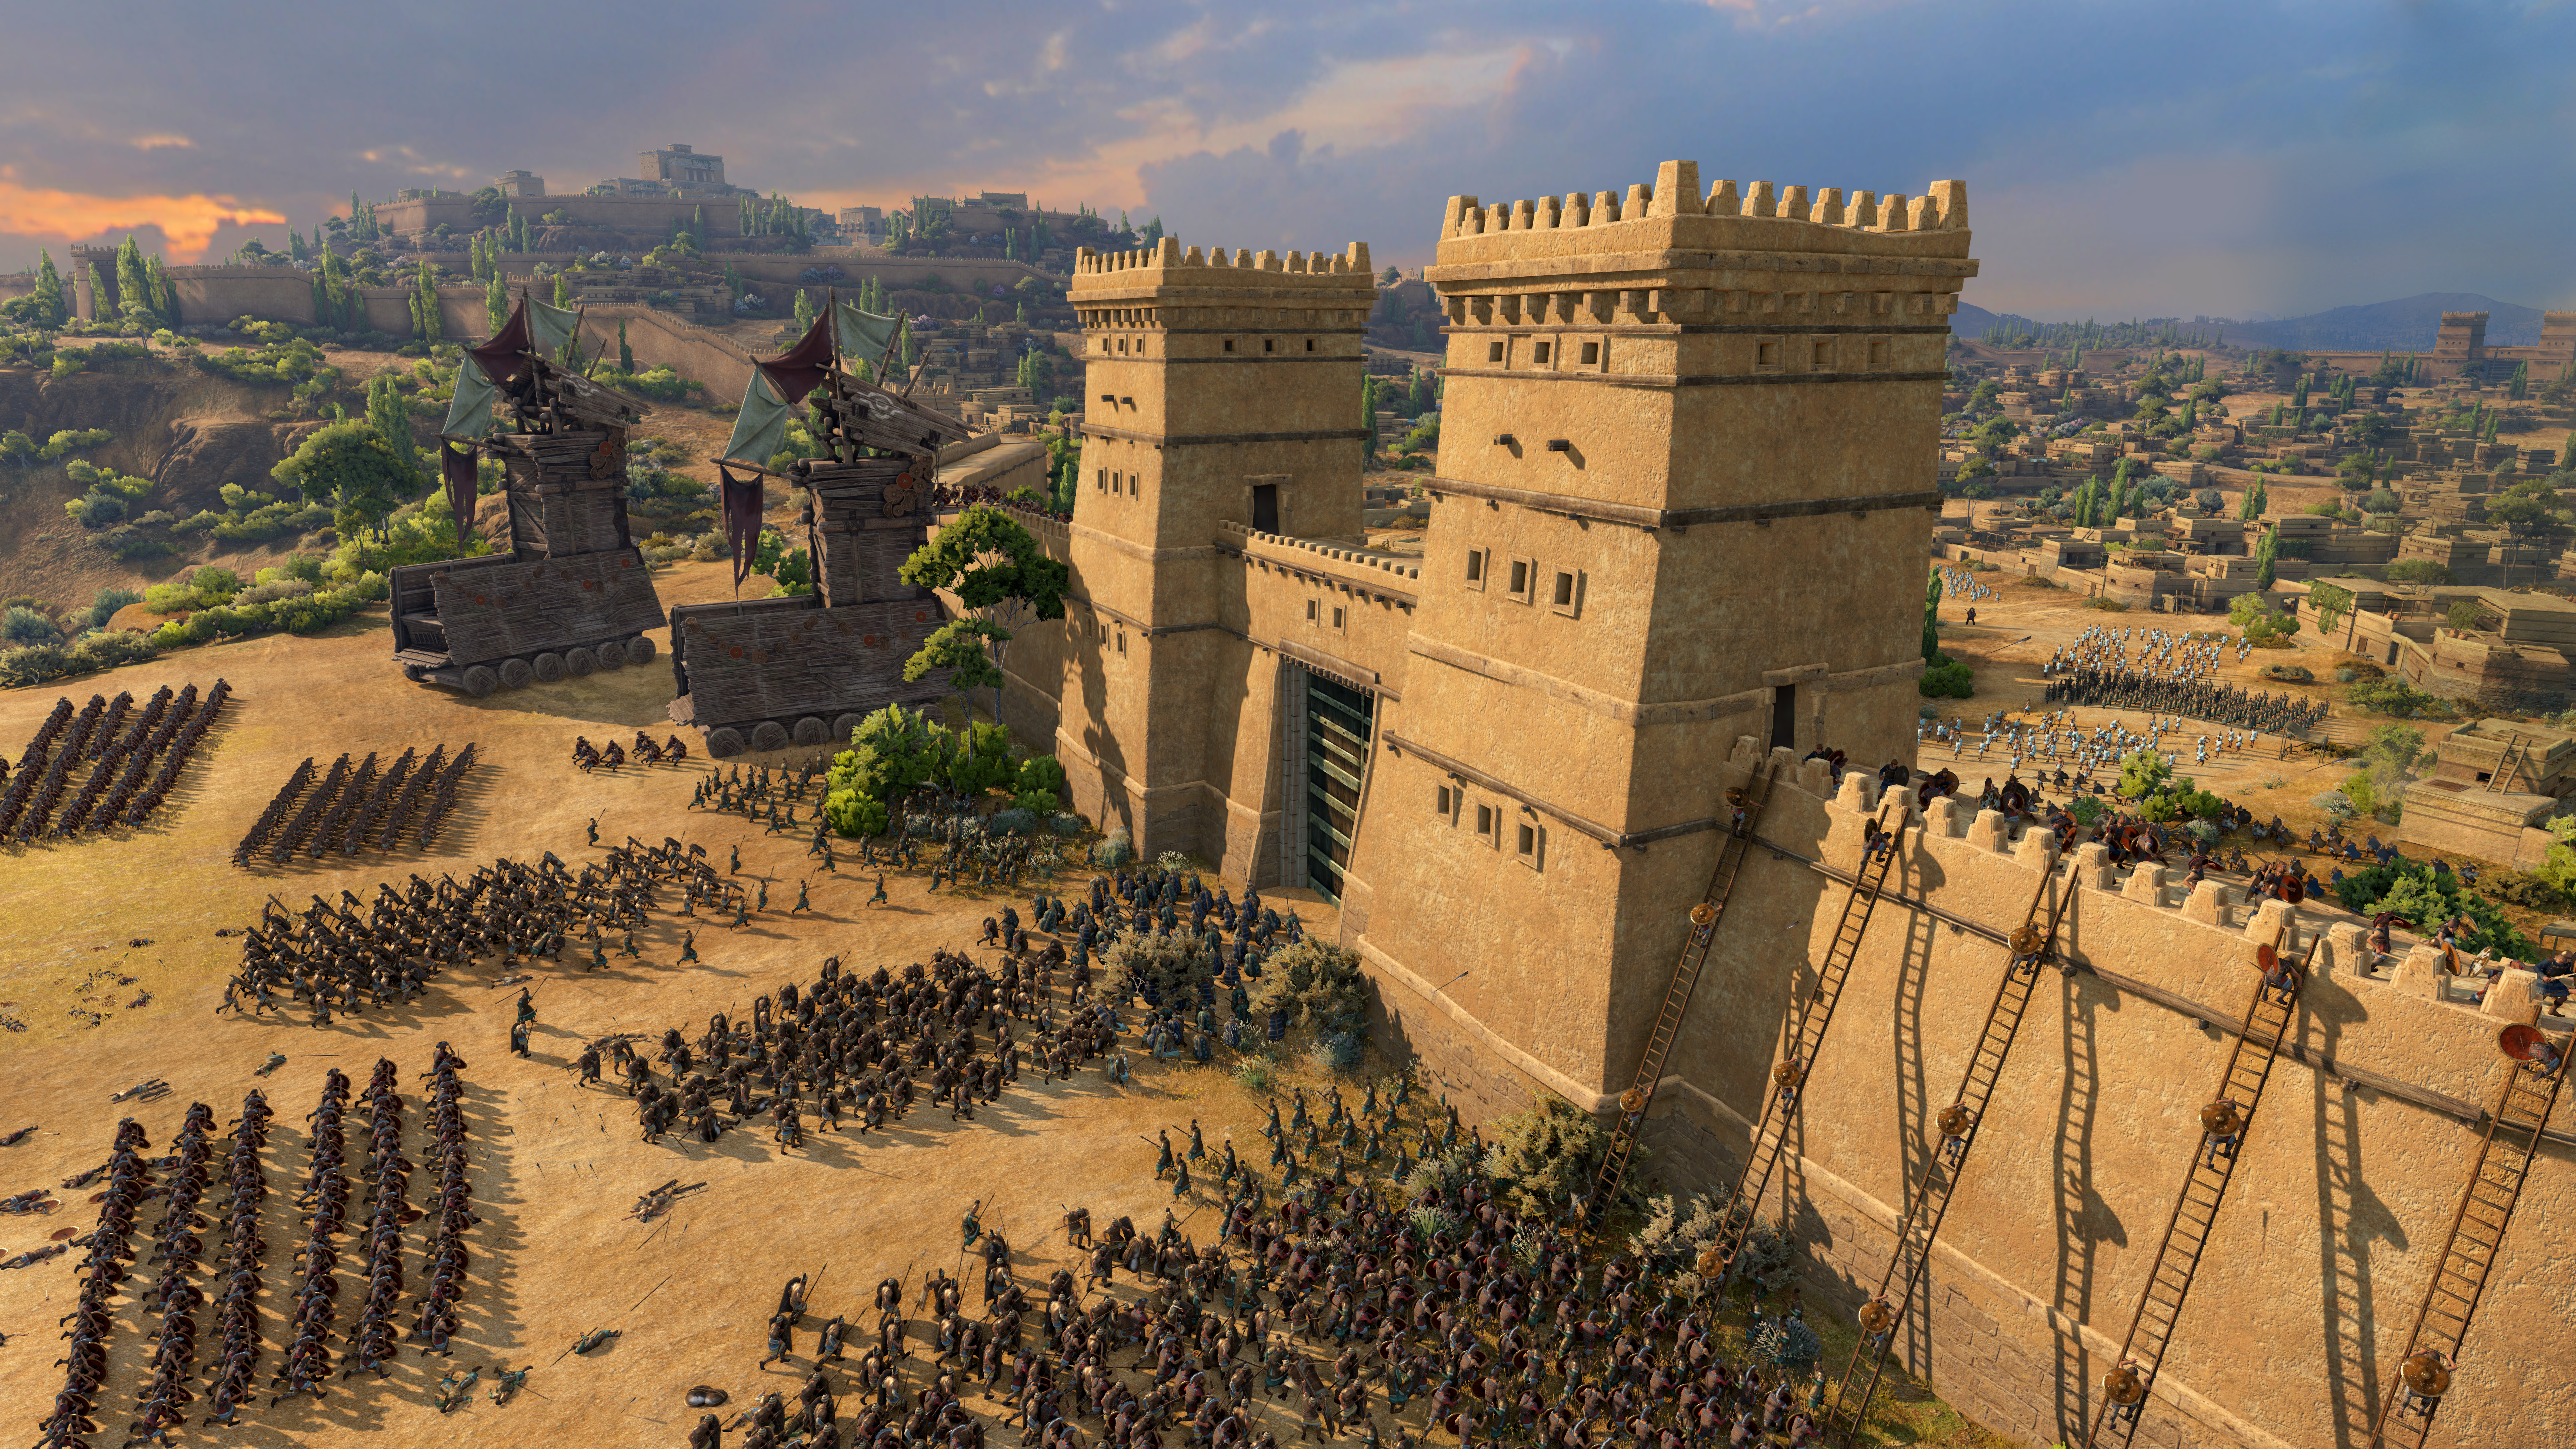 HD desktop wallpaper of A Total War Saga: TROY featuring battle scene with soldiers and fortifications.